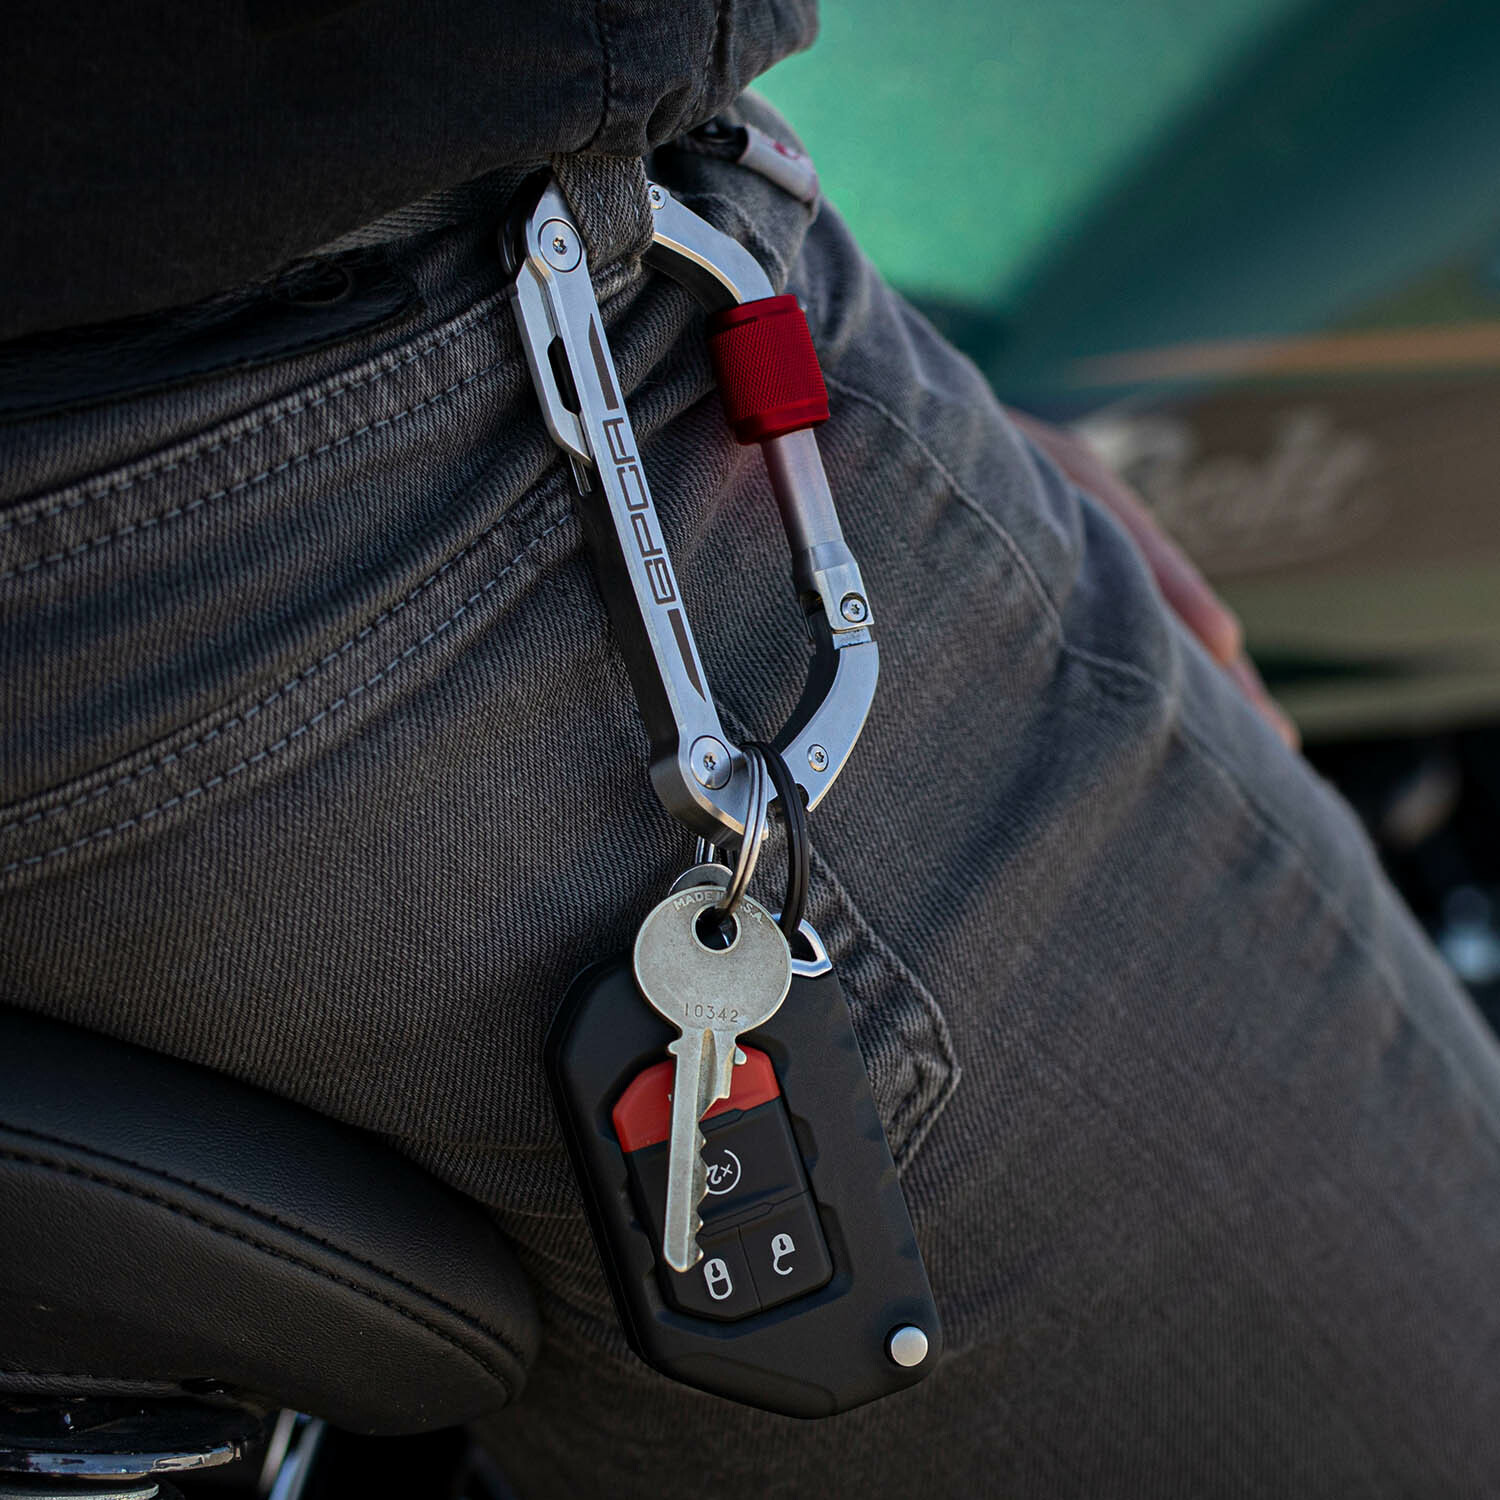 gpca-carabiner-red-ring-add-on_0000_655A6957 red.jpg